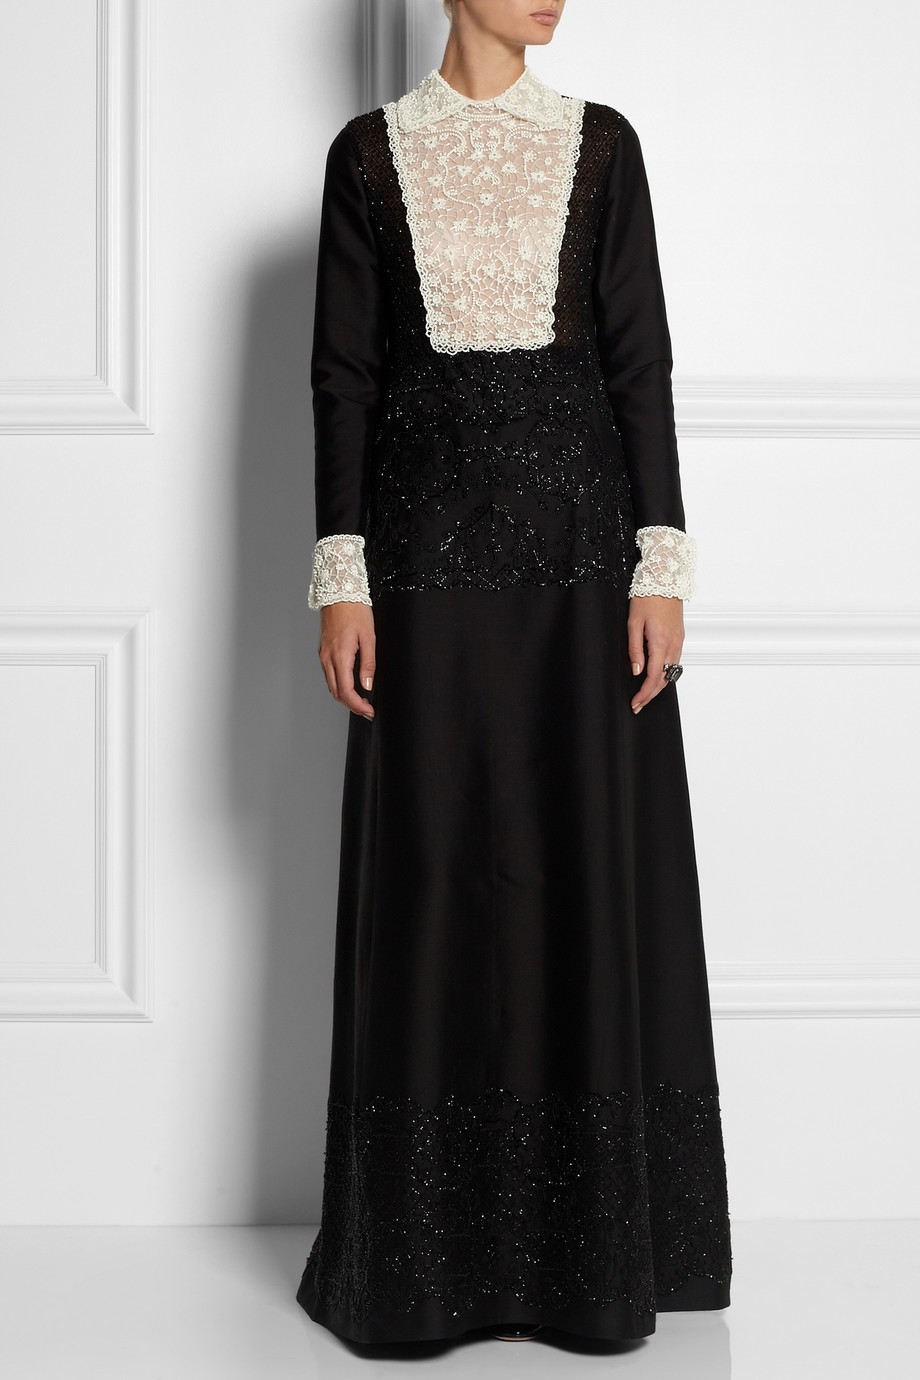 Lyst - Valentino Beaded Cotton and Silkblend Gown in Black